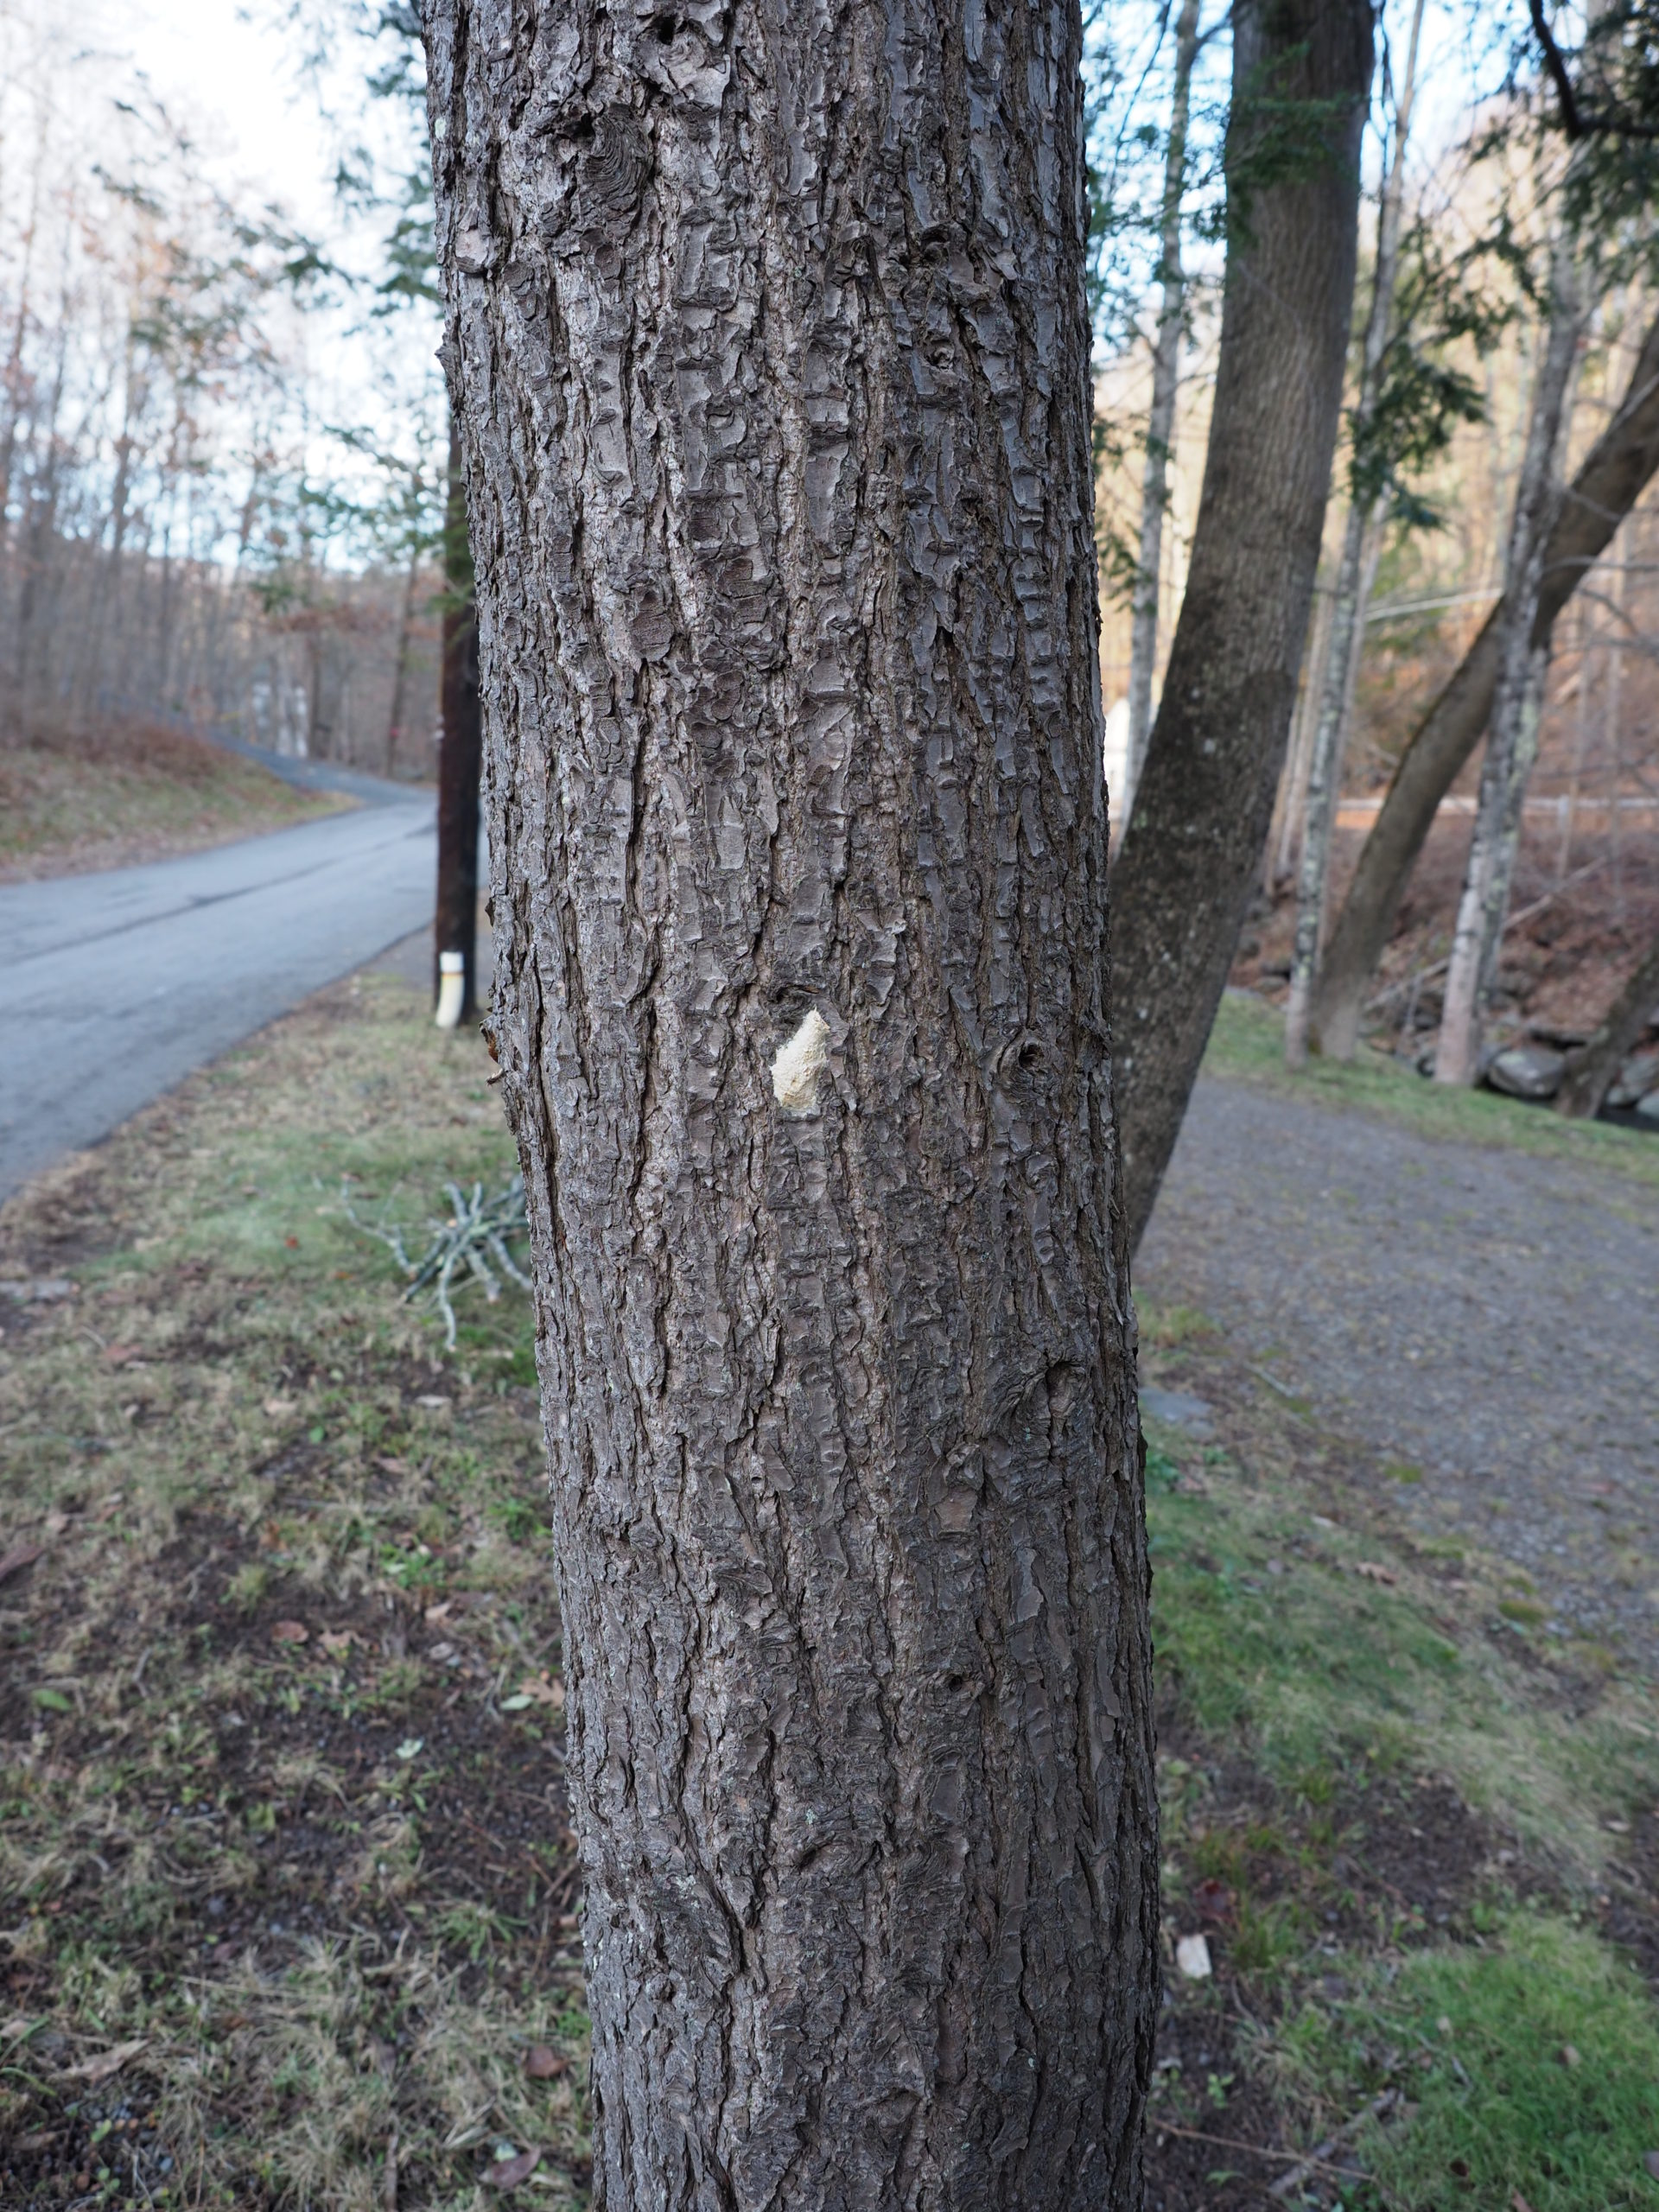 From a distance of only 5 feet, the gypsy moth egg mass (dead center on the hemlock truck) could be easily overlooked by most home and property owners.